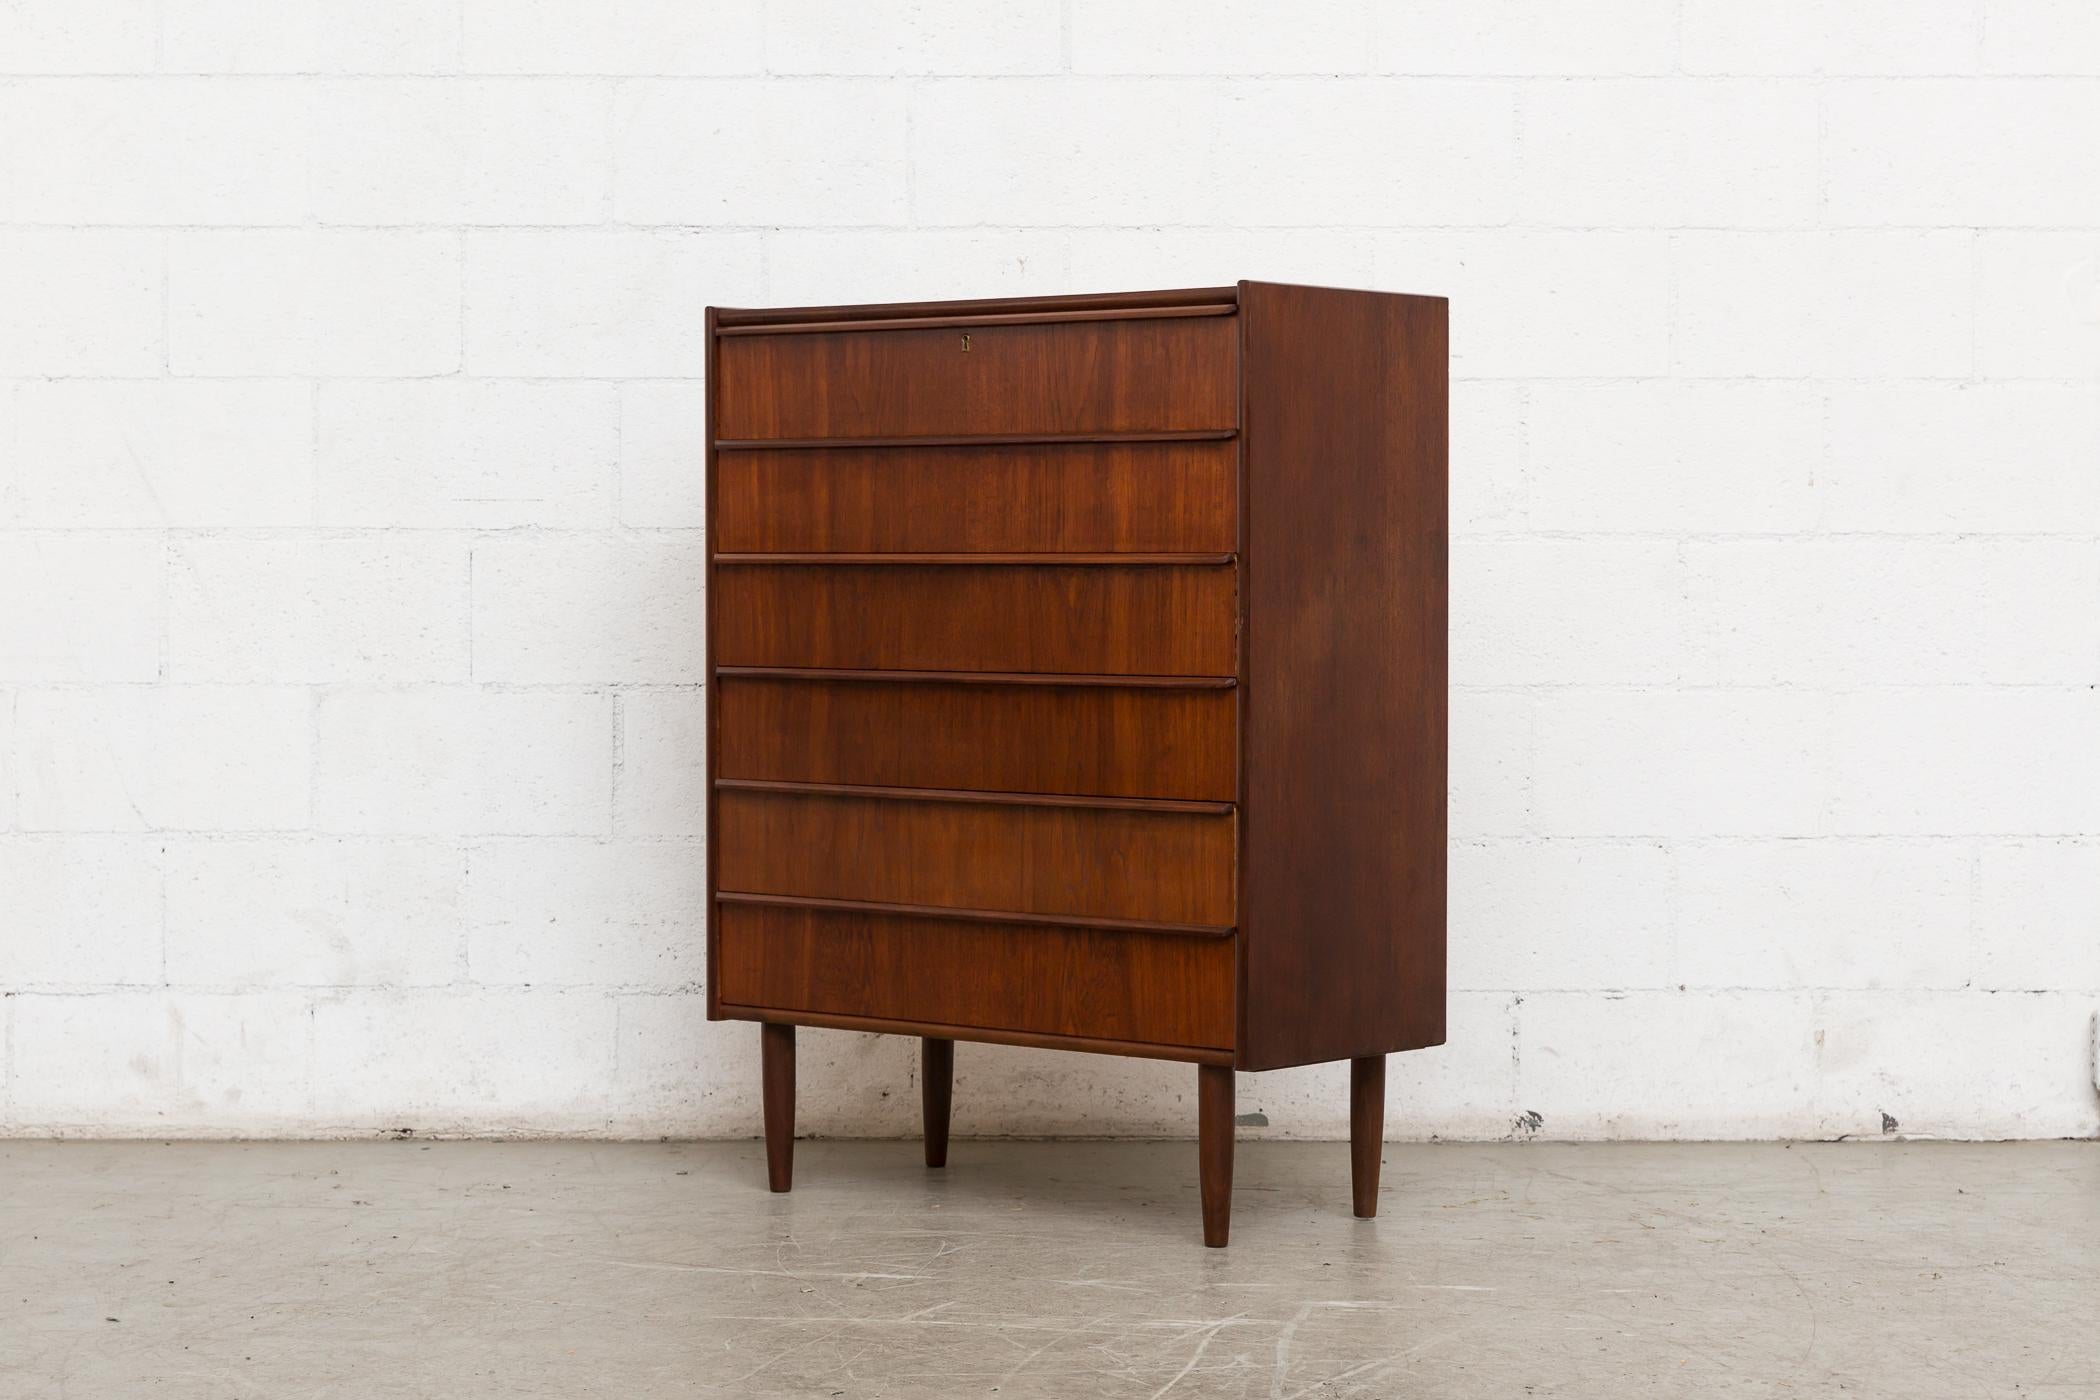 Midcentury Danish teak dresser with six drawers and organically carved linear hand pulls. Tapered legs. Lightly refinished. Good original condition, Denmark, 1960s.